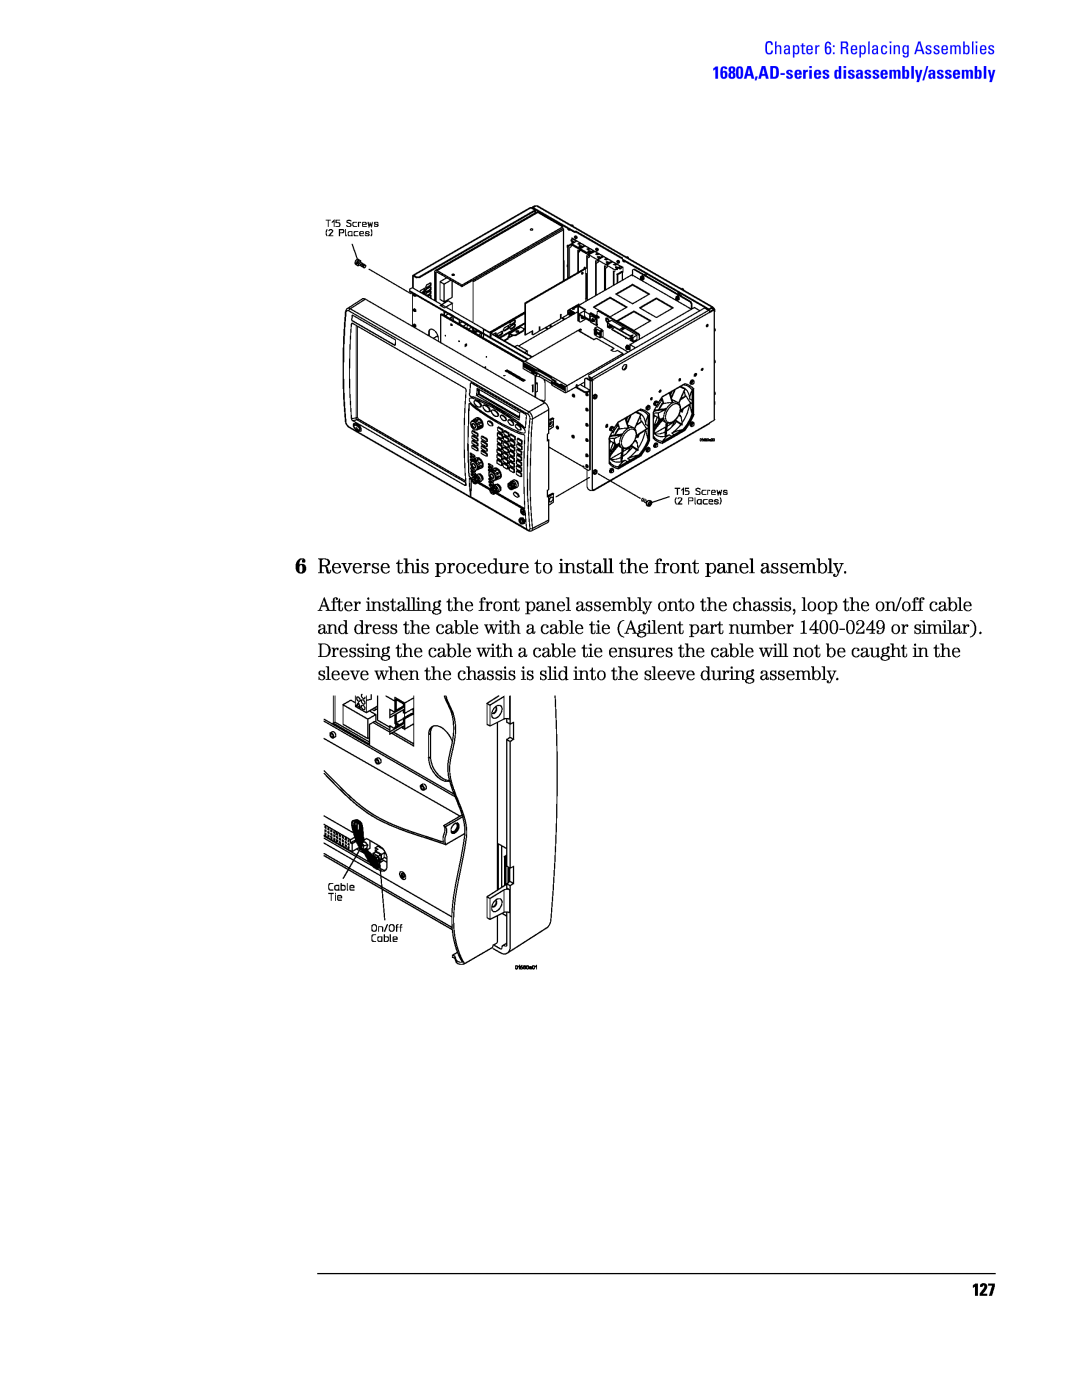 Agilent Technologies 1690, 1680 manual Reverse this procedure to install the front panel assembly 